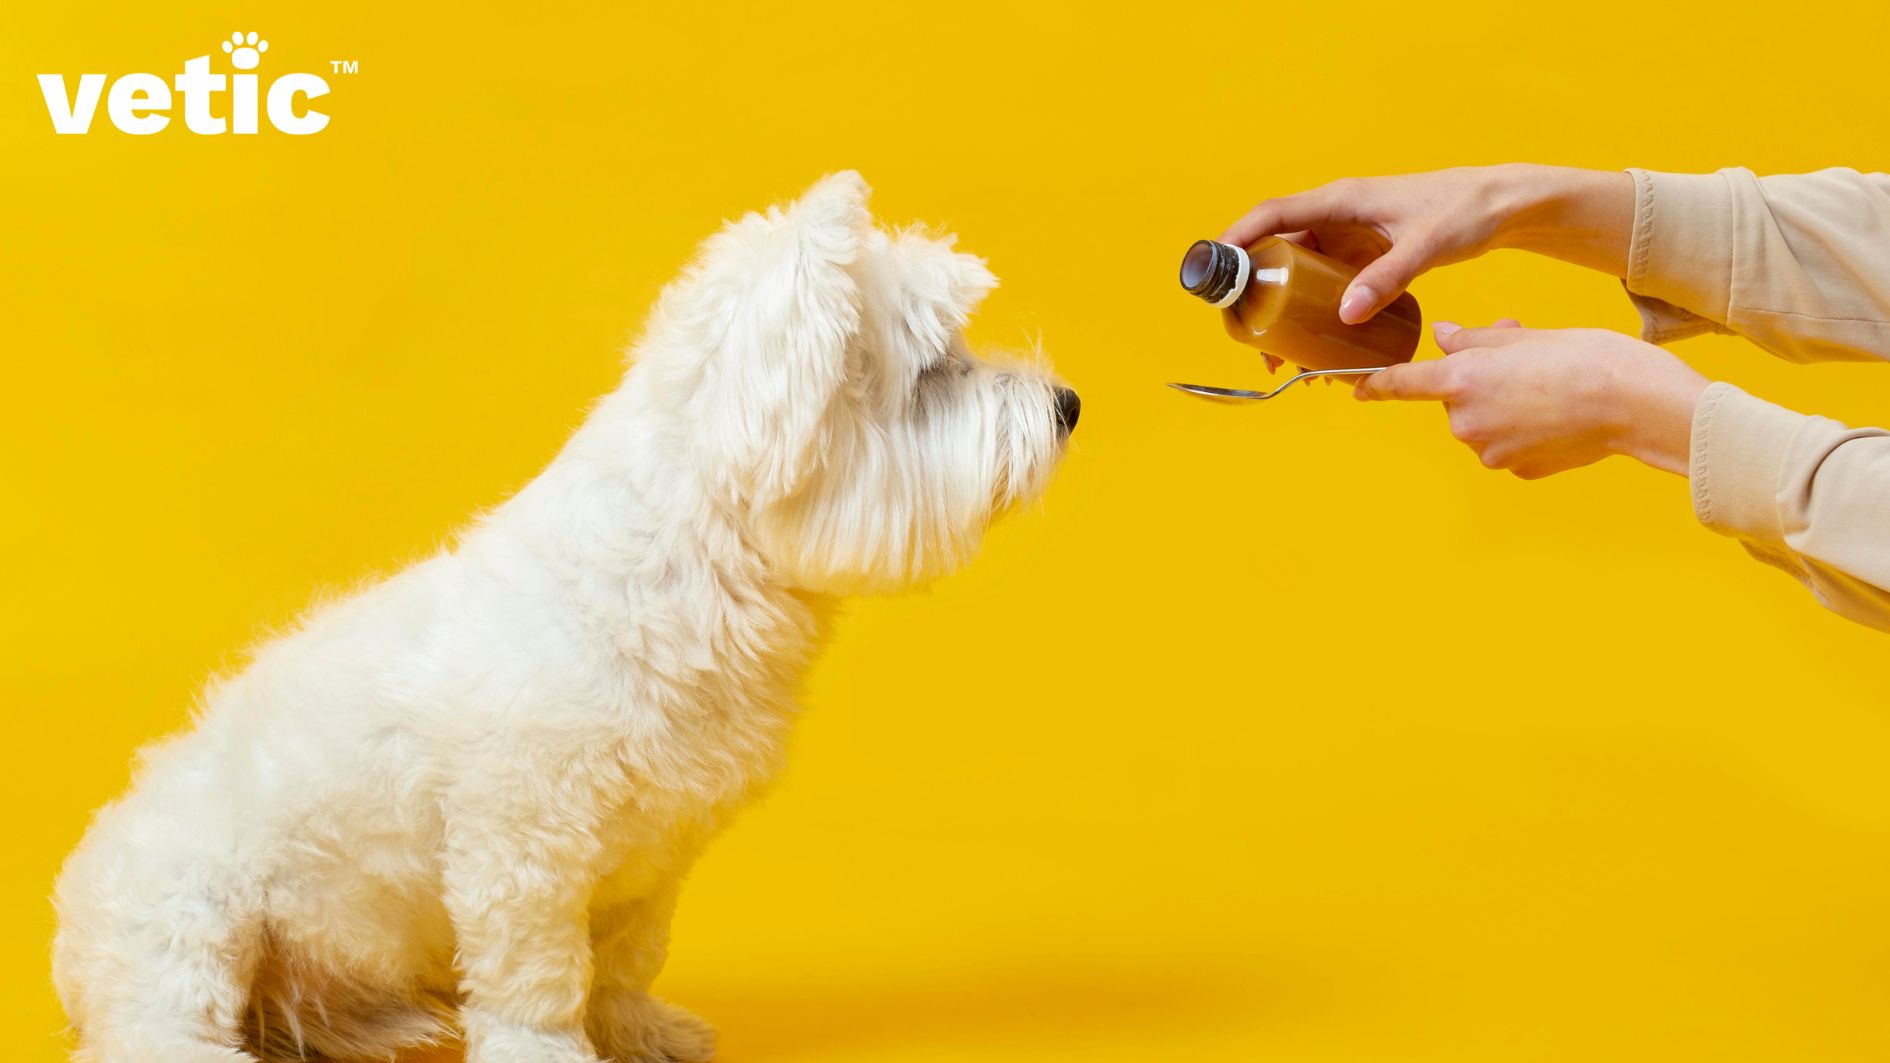 Fully white fluffy toy dog on the left. side profile of the dog visible. could be a Bichon Frise. Two hands visible on the right. The person is holding an unlabeled medicine bottle in their right hand and a spoon on the left, ready to pour the med.